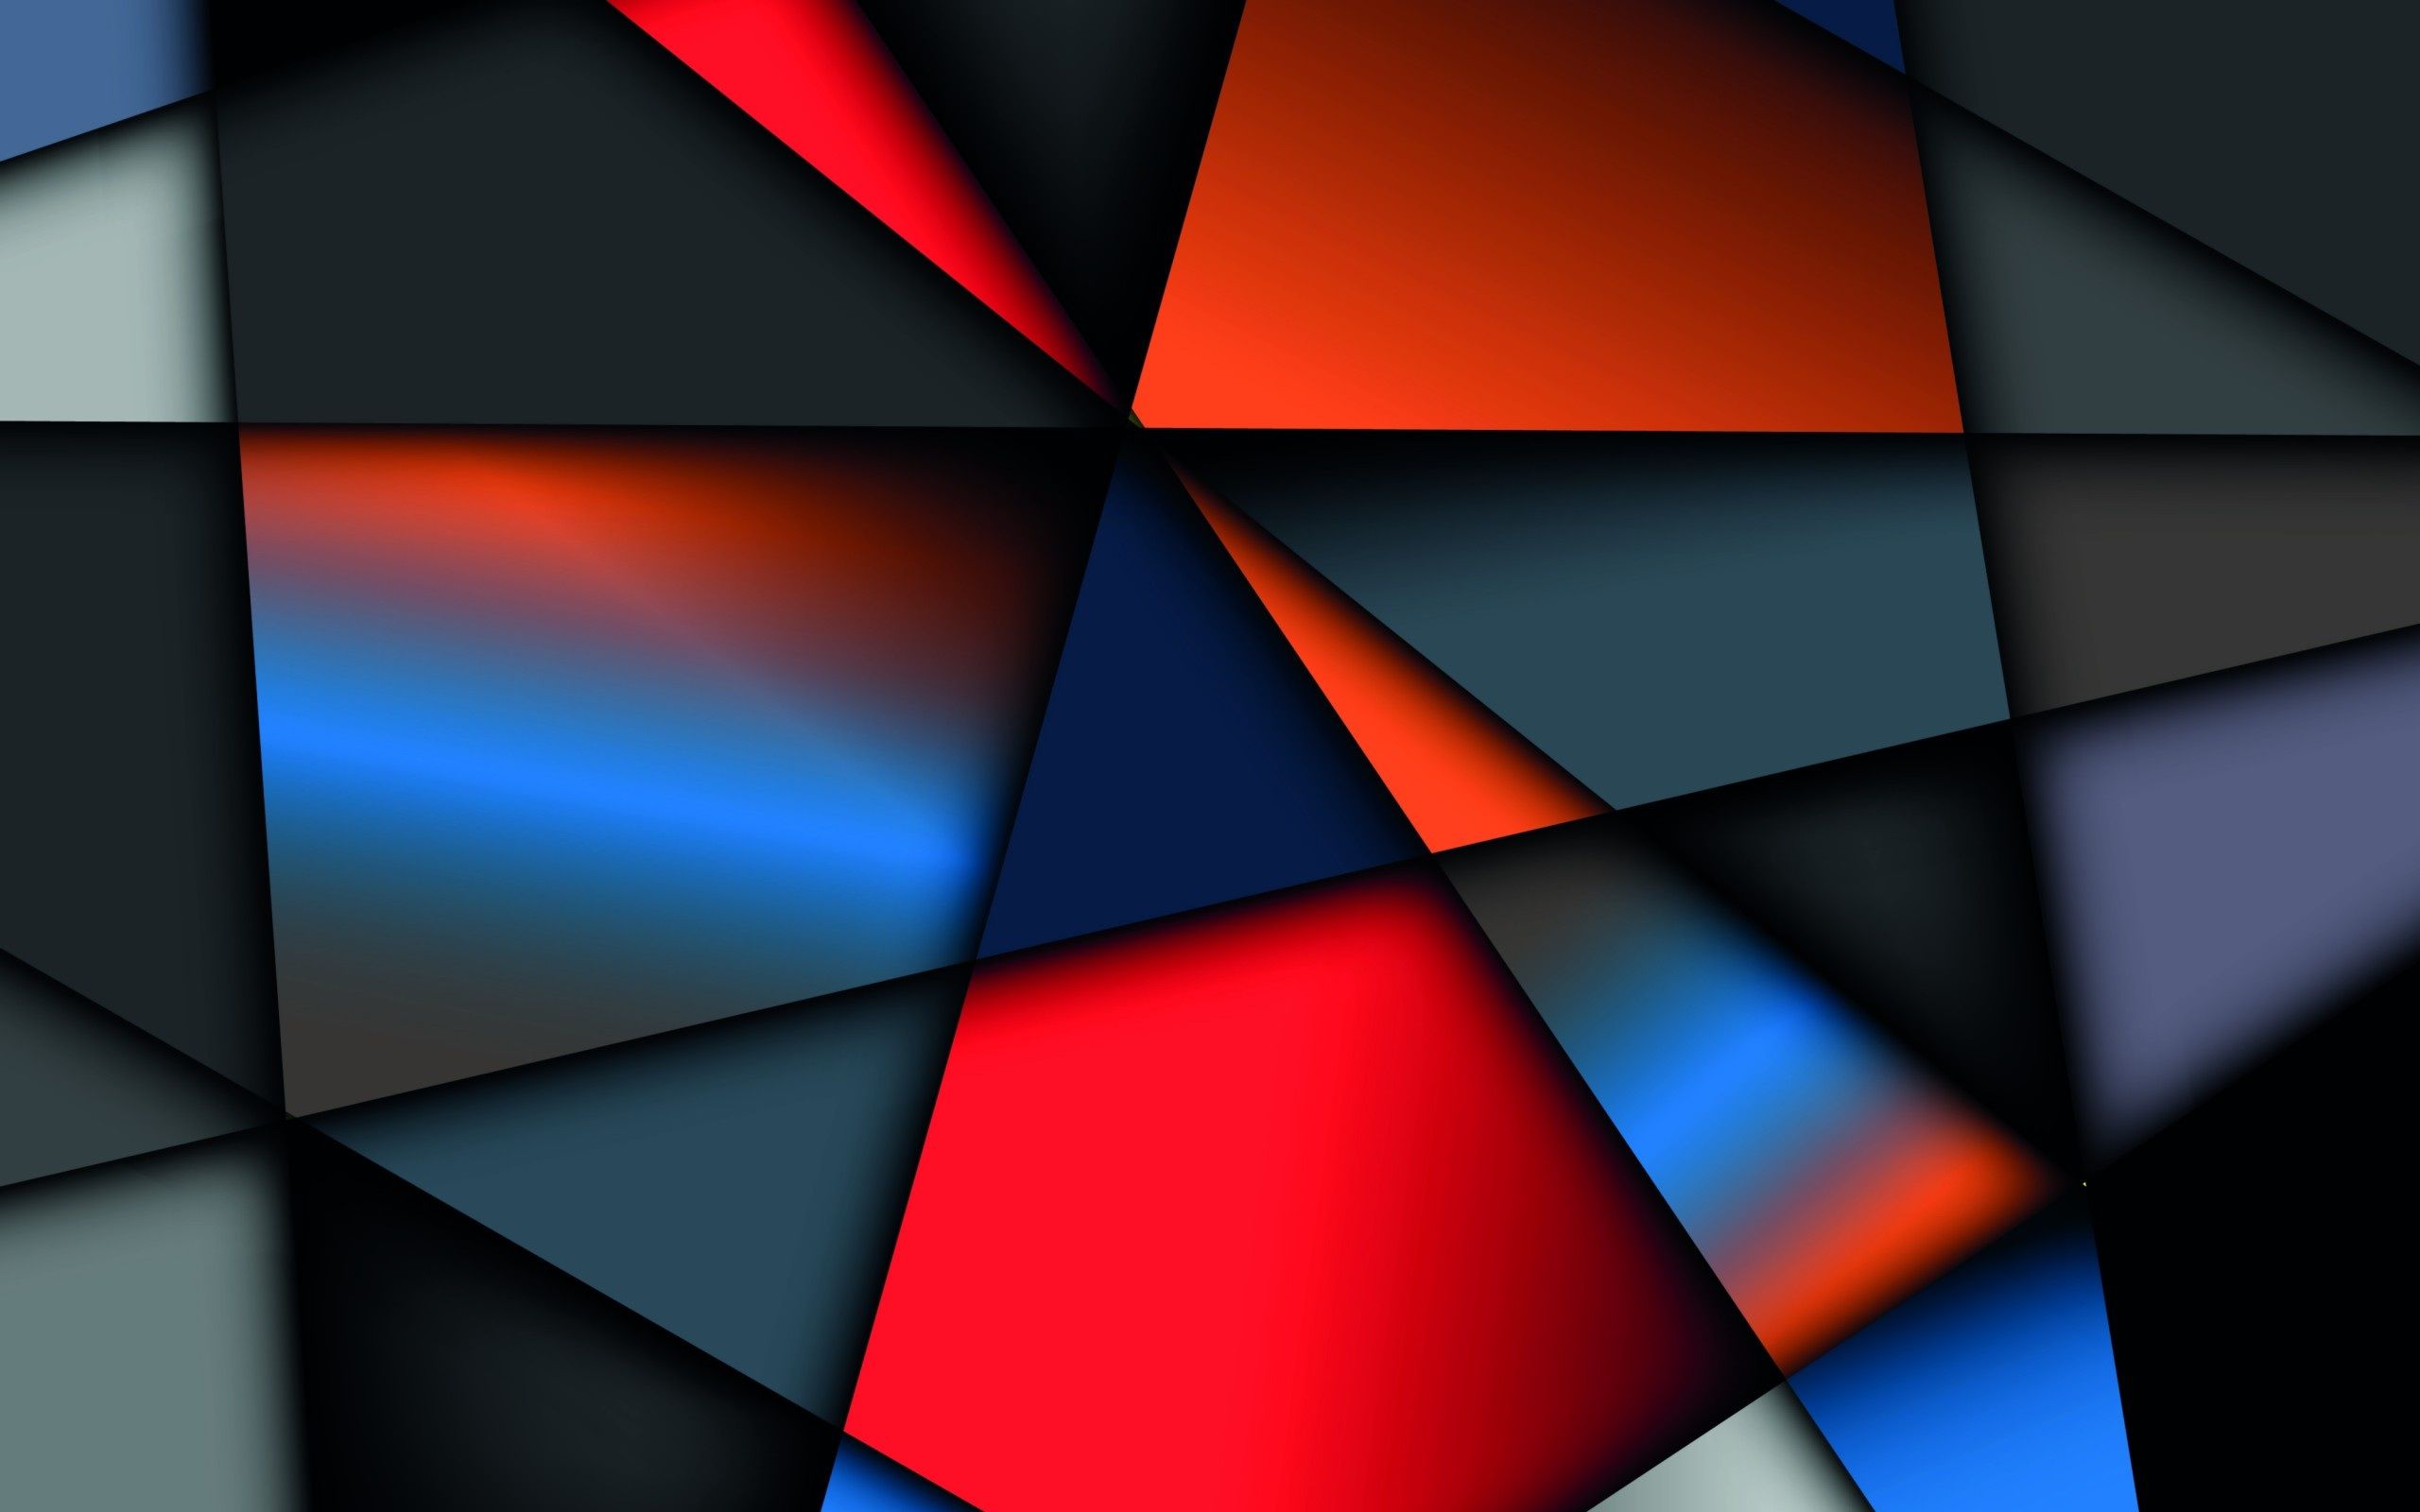 4K Abstract Wallpapers Group (81+)